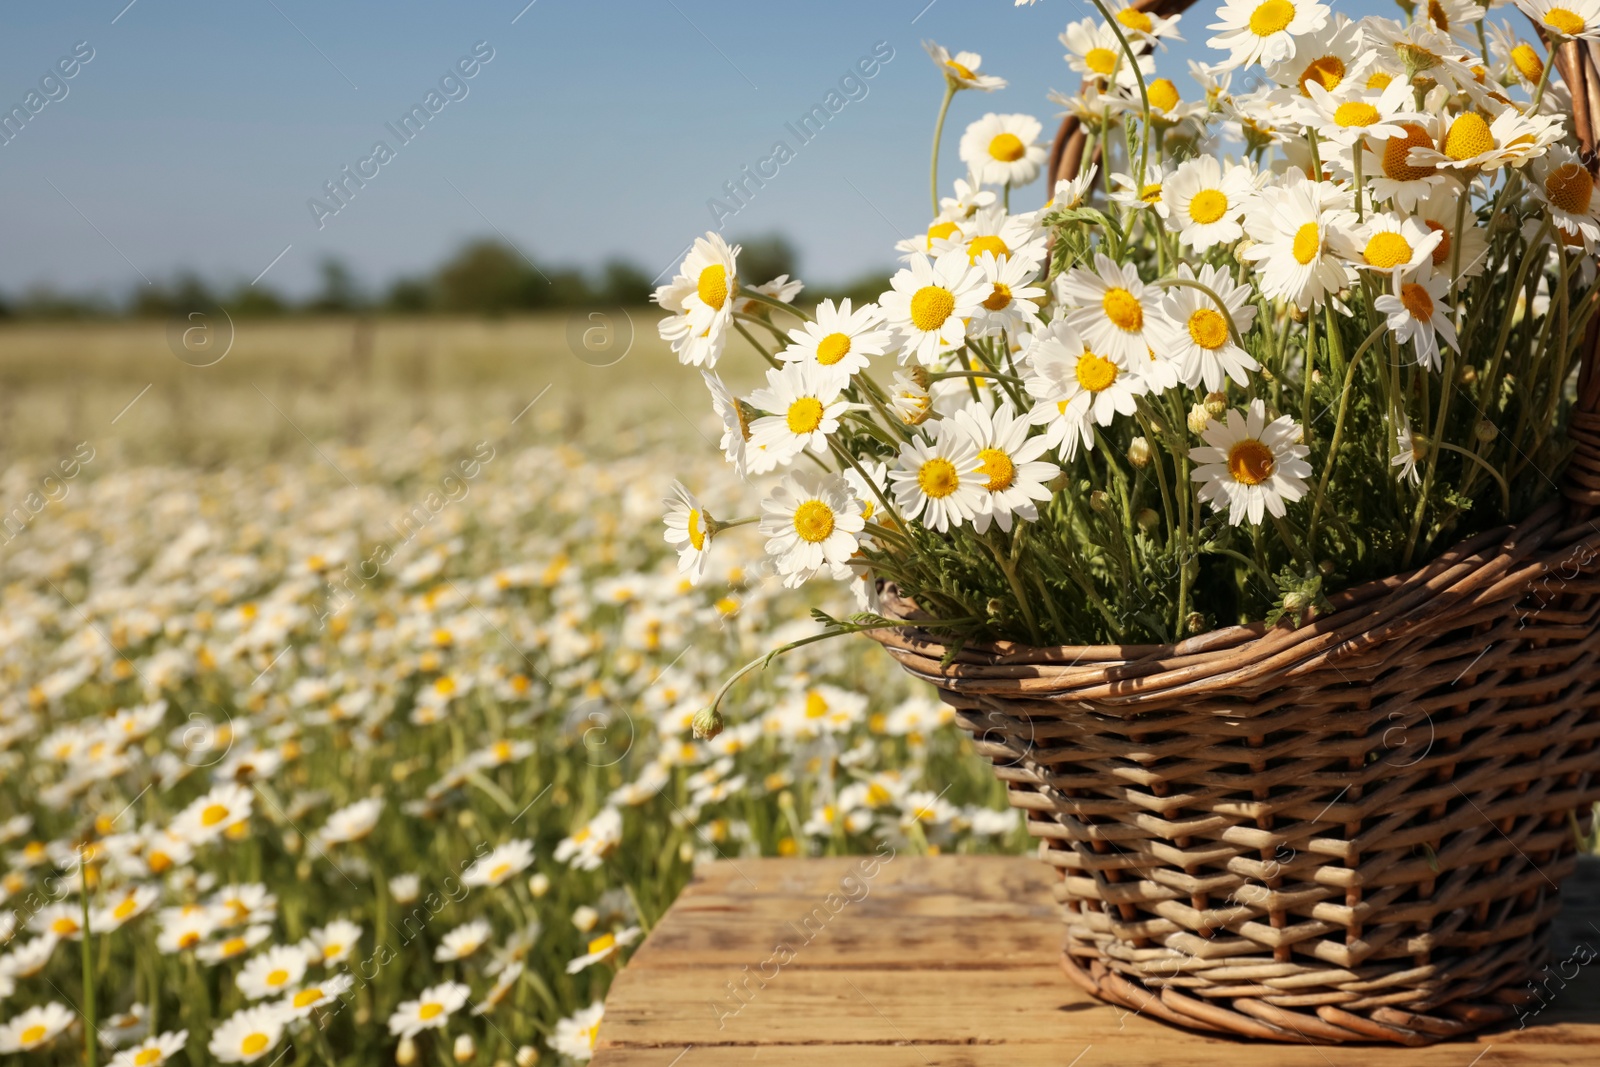 Photo of Basket with beautiful chamomiles on wooden table in field, closeup